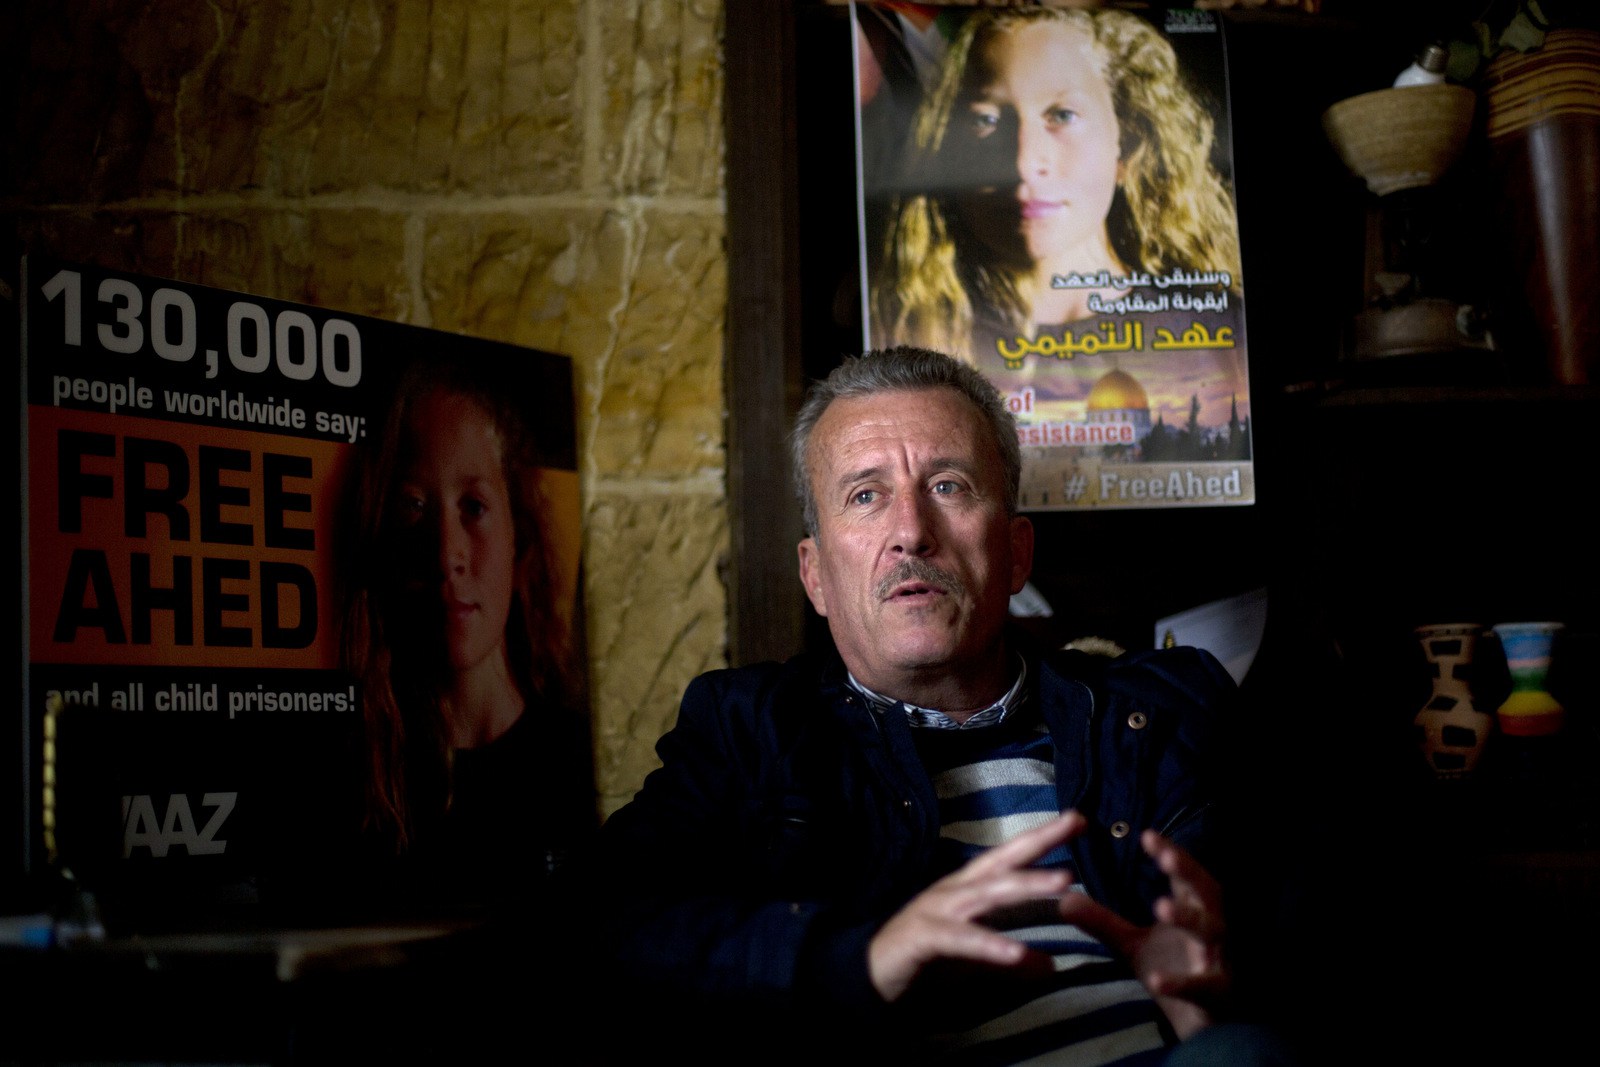 Bassem Tamimi speaks in front of a poster showing his daughter Ahed at his home in Nabi Saleh near the West Bank city of Ramallah. Israel's hard-charging prosecution of his 16-year-old daughter who slapped two Israeli soldiers has trained a spotlight on her family and its role in near-weekly protests against Israeli occupation staged in several West Bank cities. (AP/Majdi Mohammed)